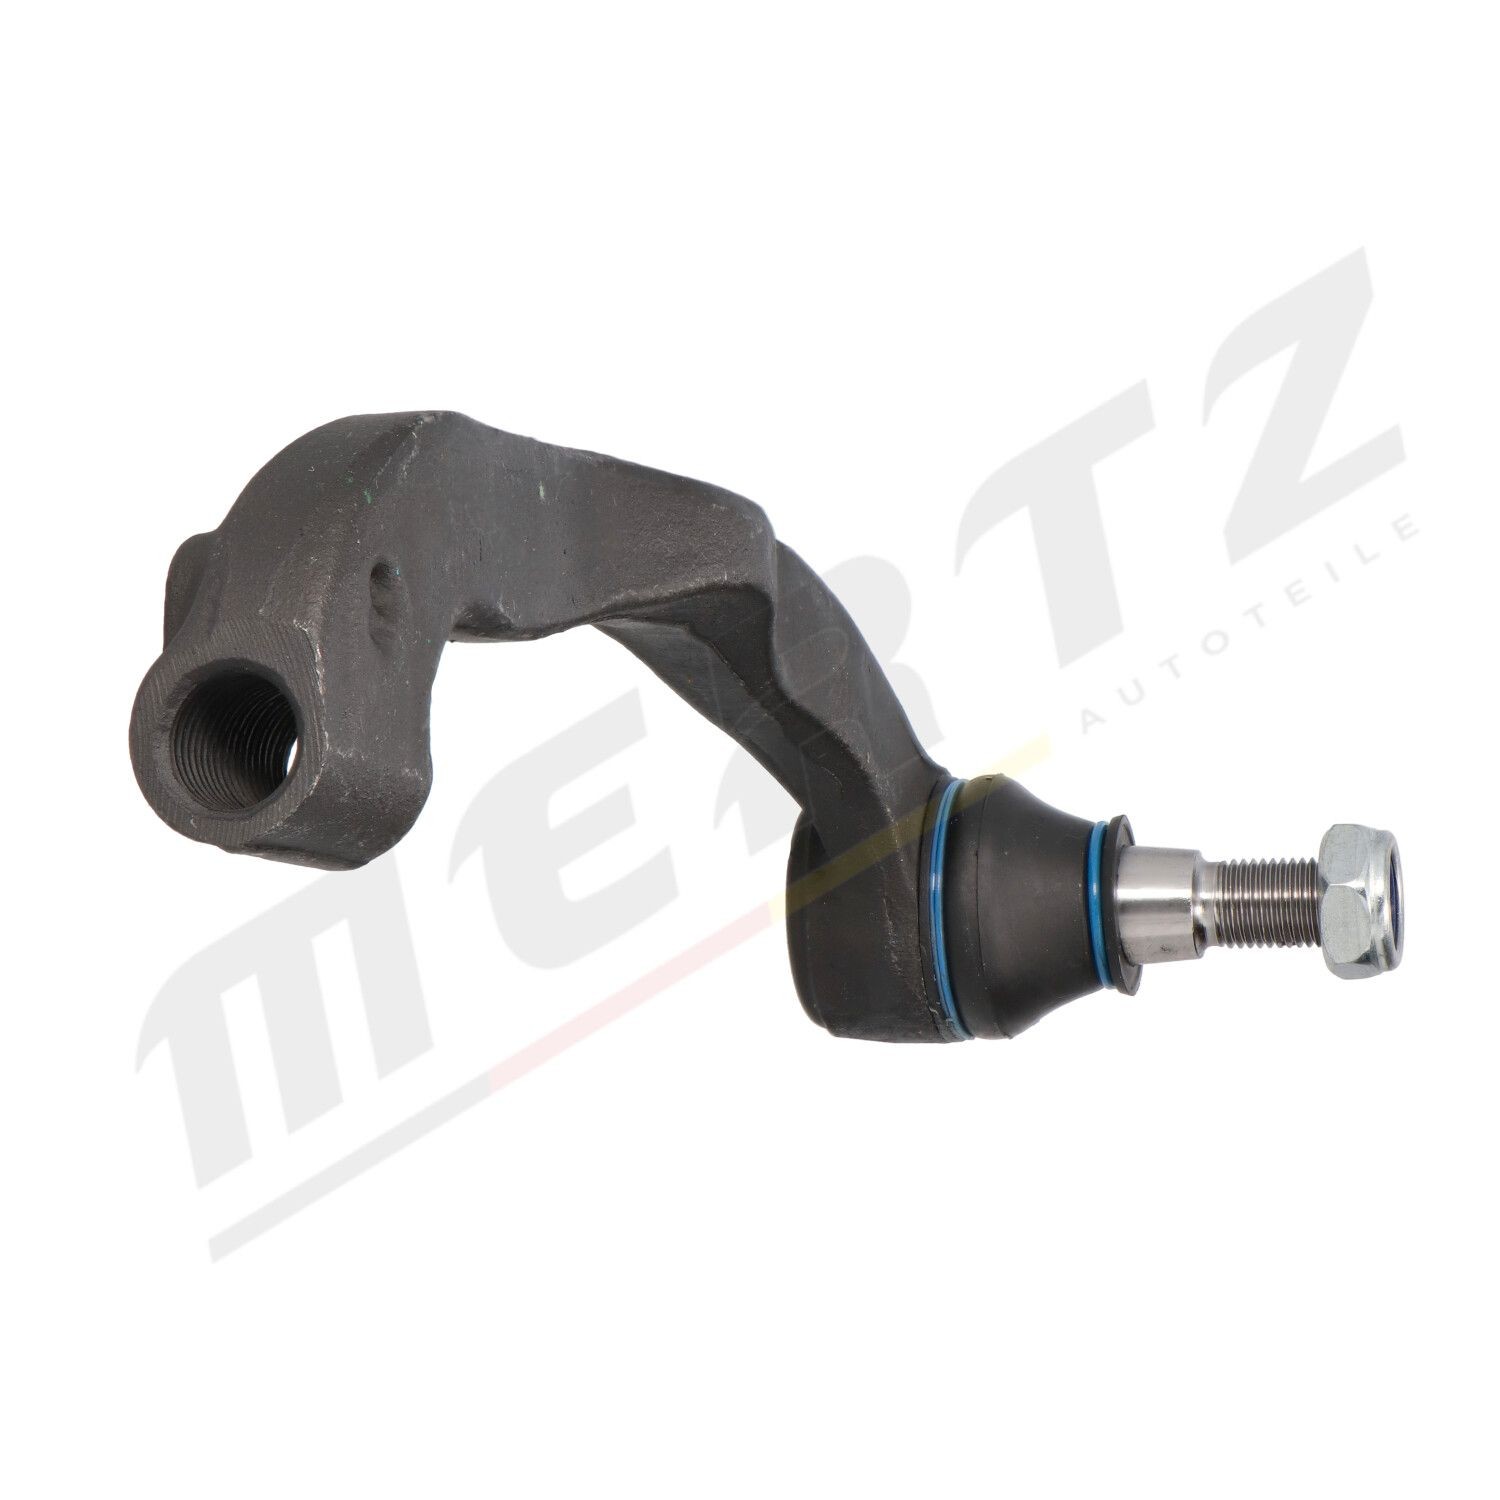 MERTZ M-S0157 Track rod end M14x1,5 mm, Front Axle Left, with self-locking nut